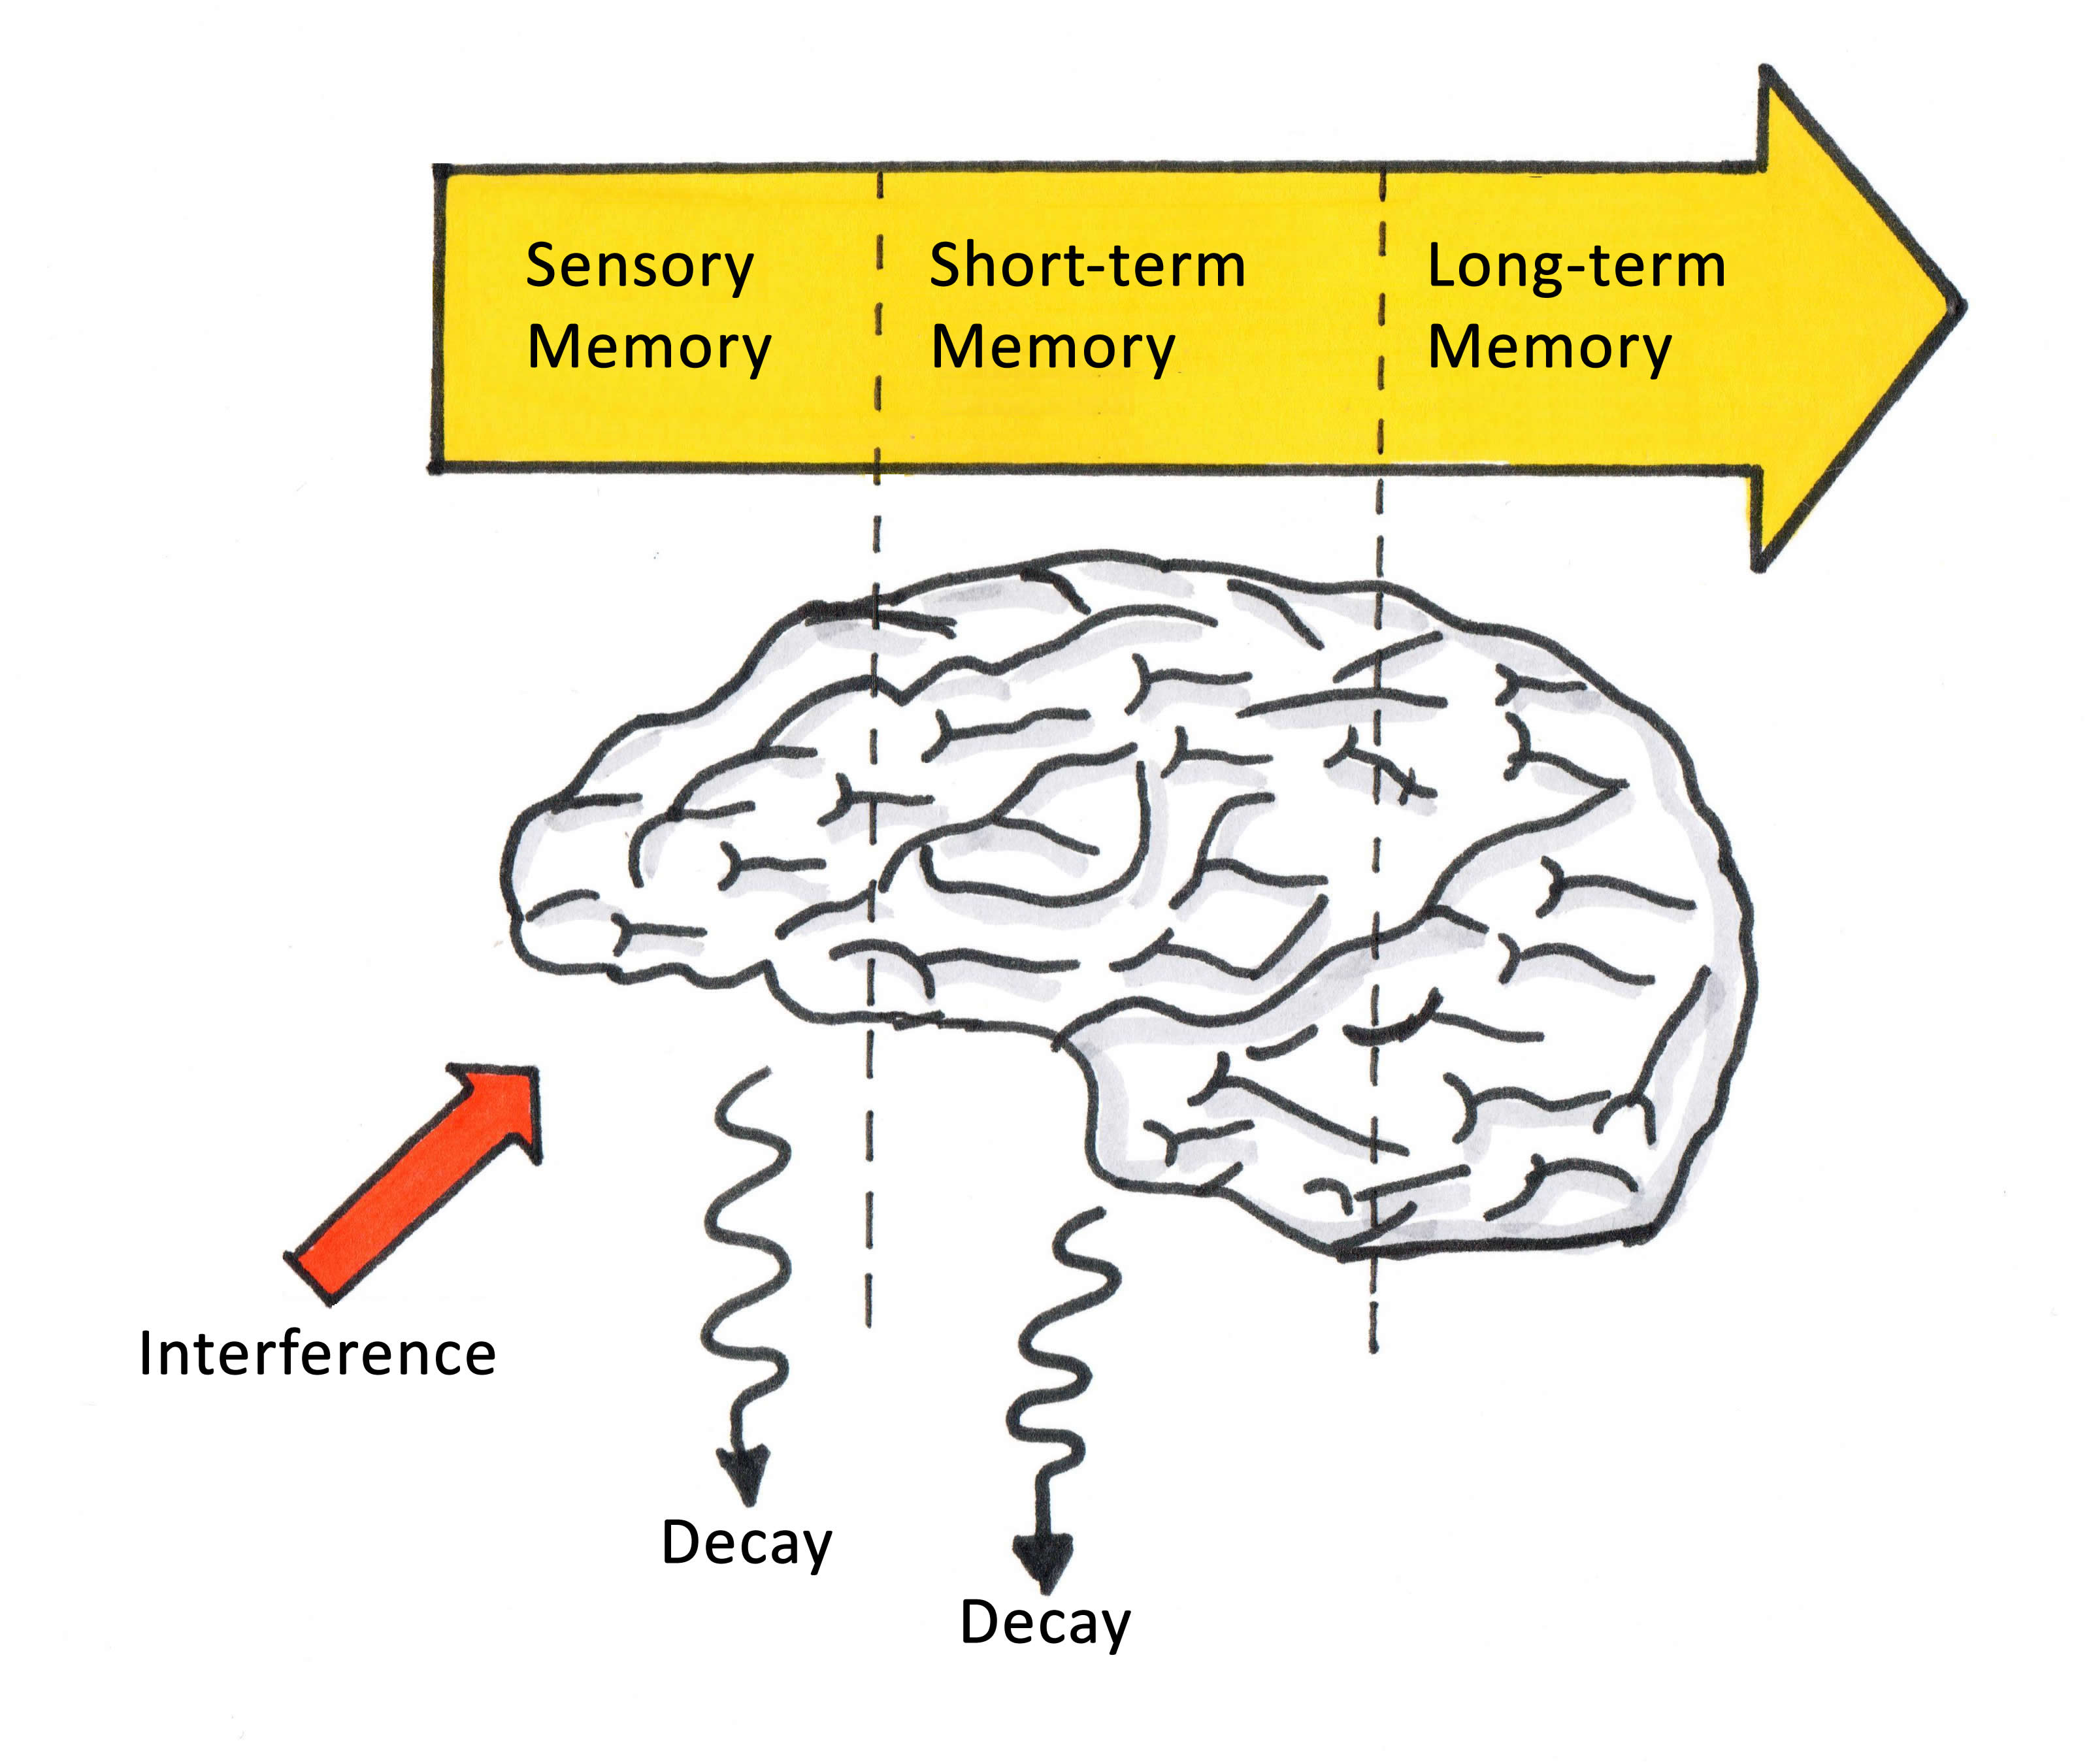 Brain zones. Sensory Memory. How Memories are formed Action 11. Anatomic Memory form icon. The Parts of the Brain responsible for short-term and long-term Memory.